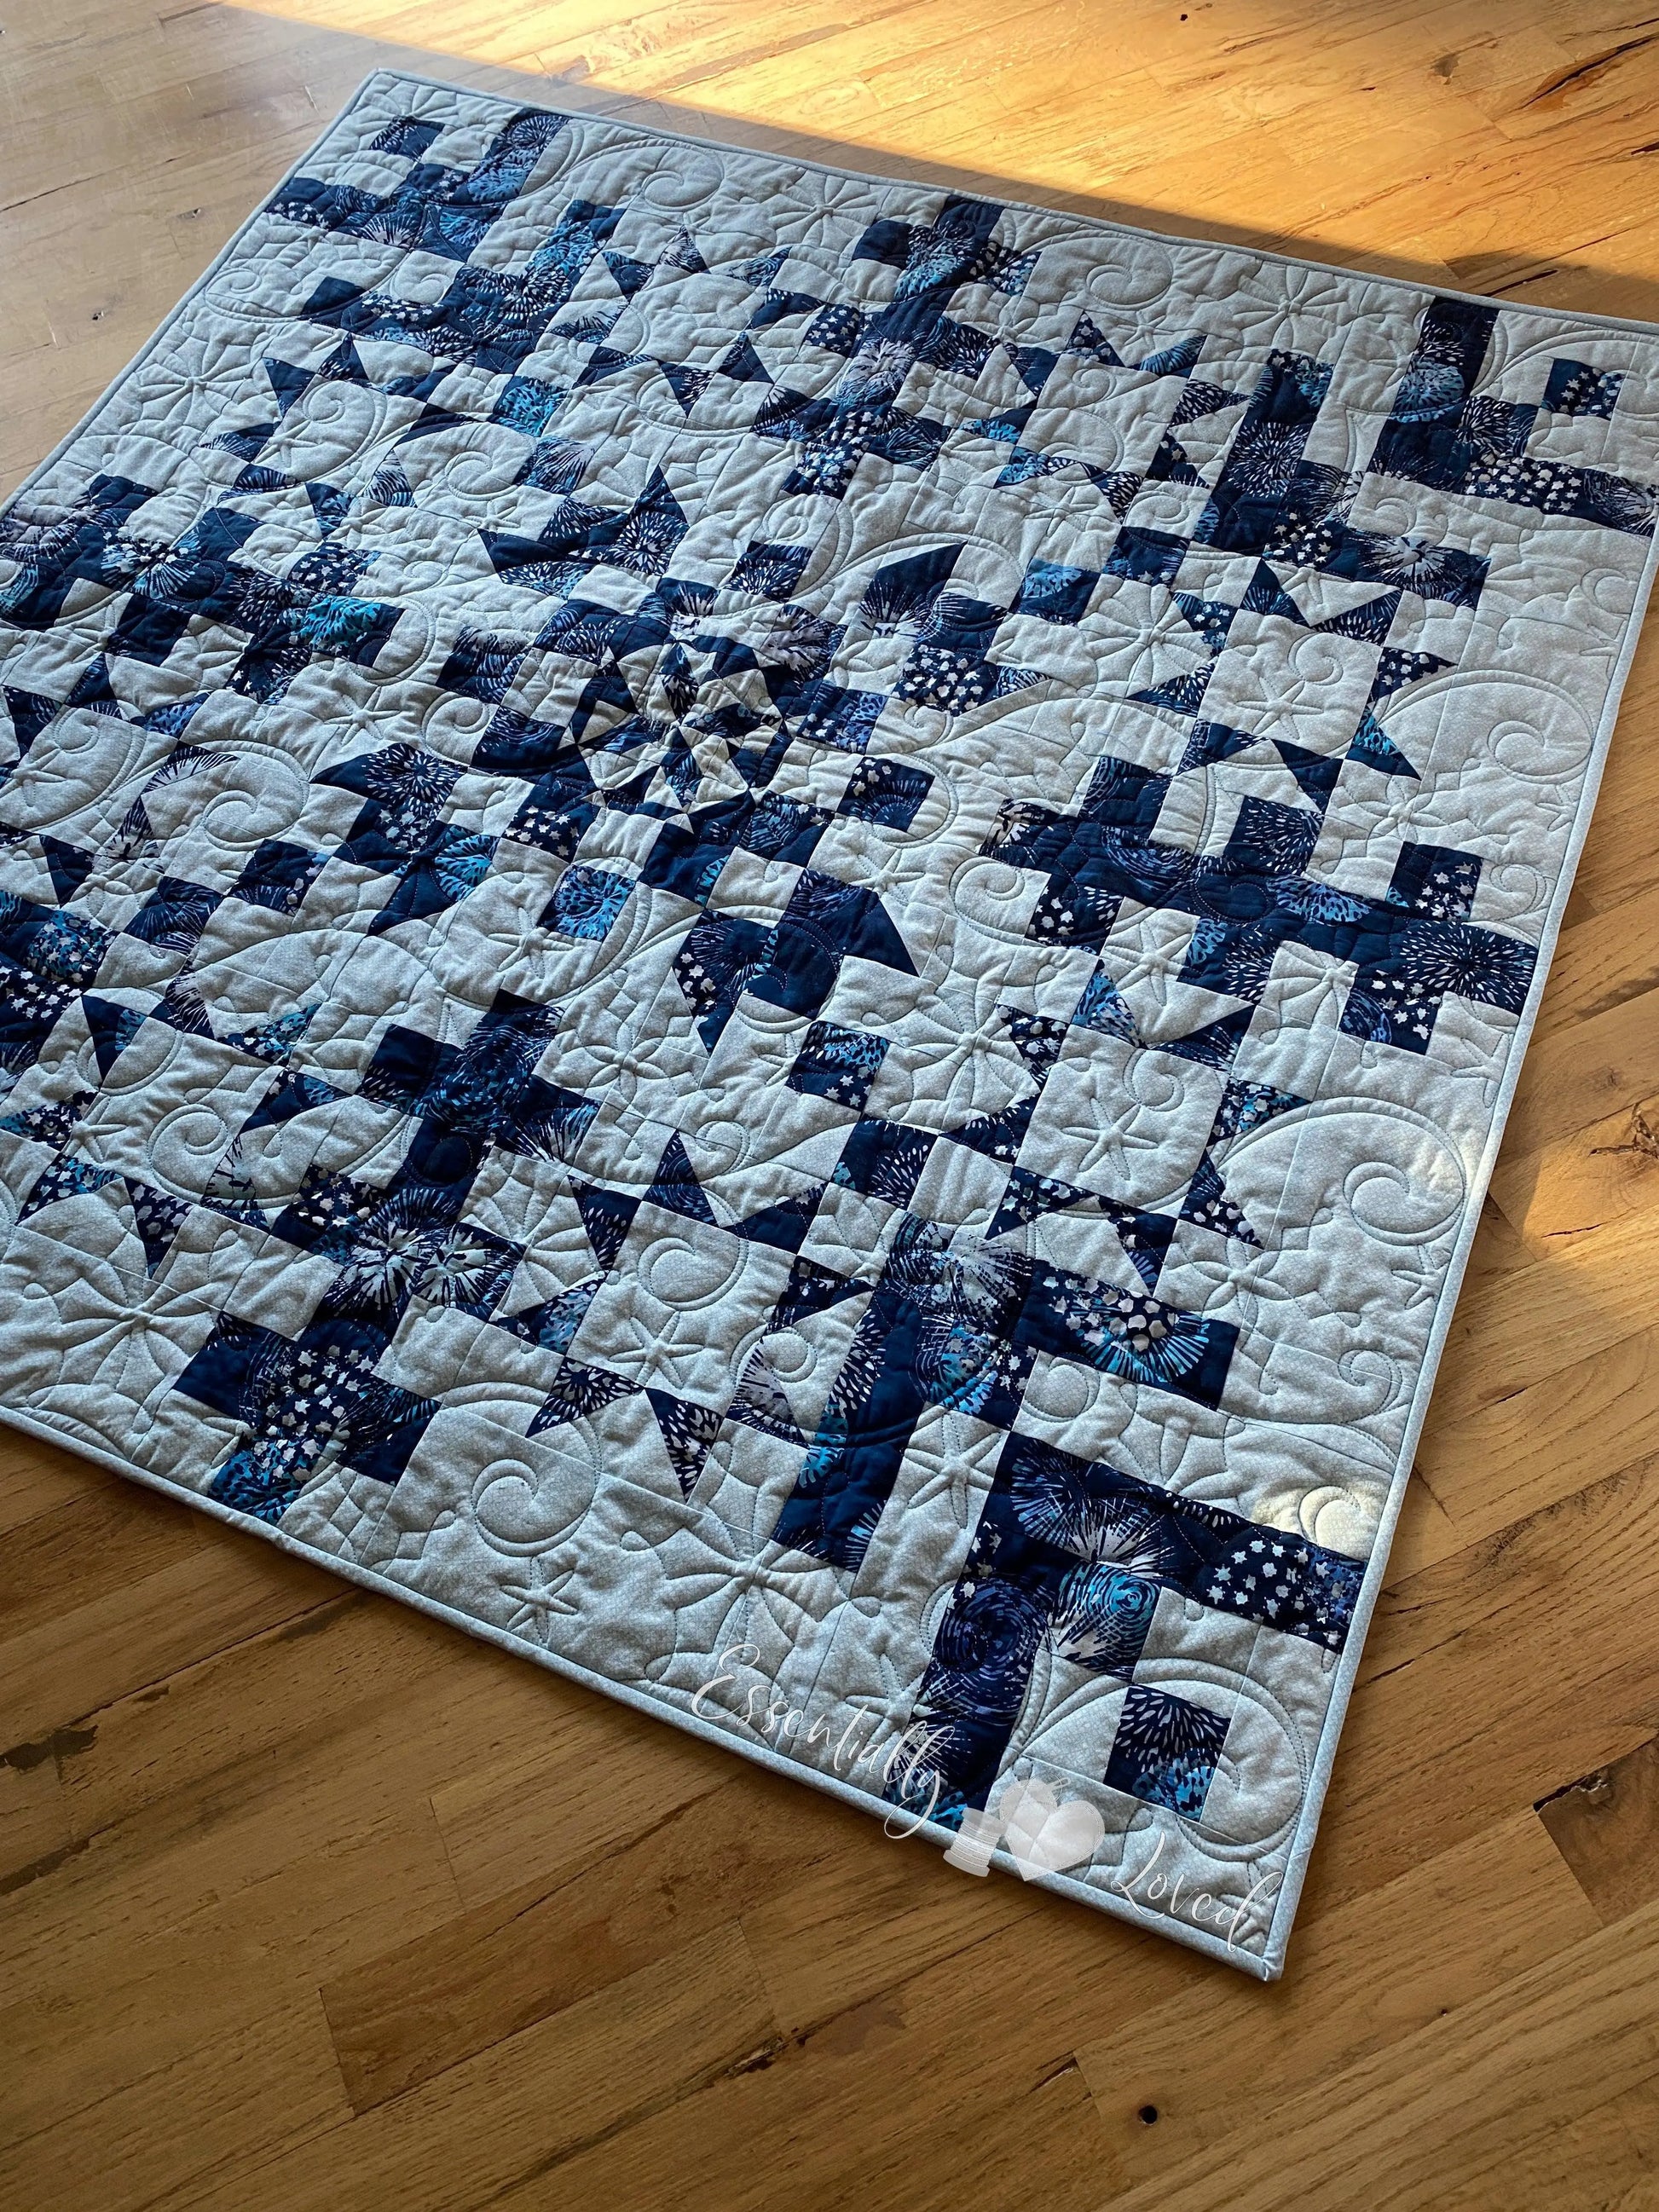 Snowflake Quilt - Essentially Loved Quilts